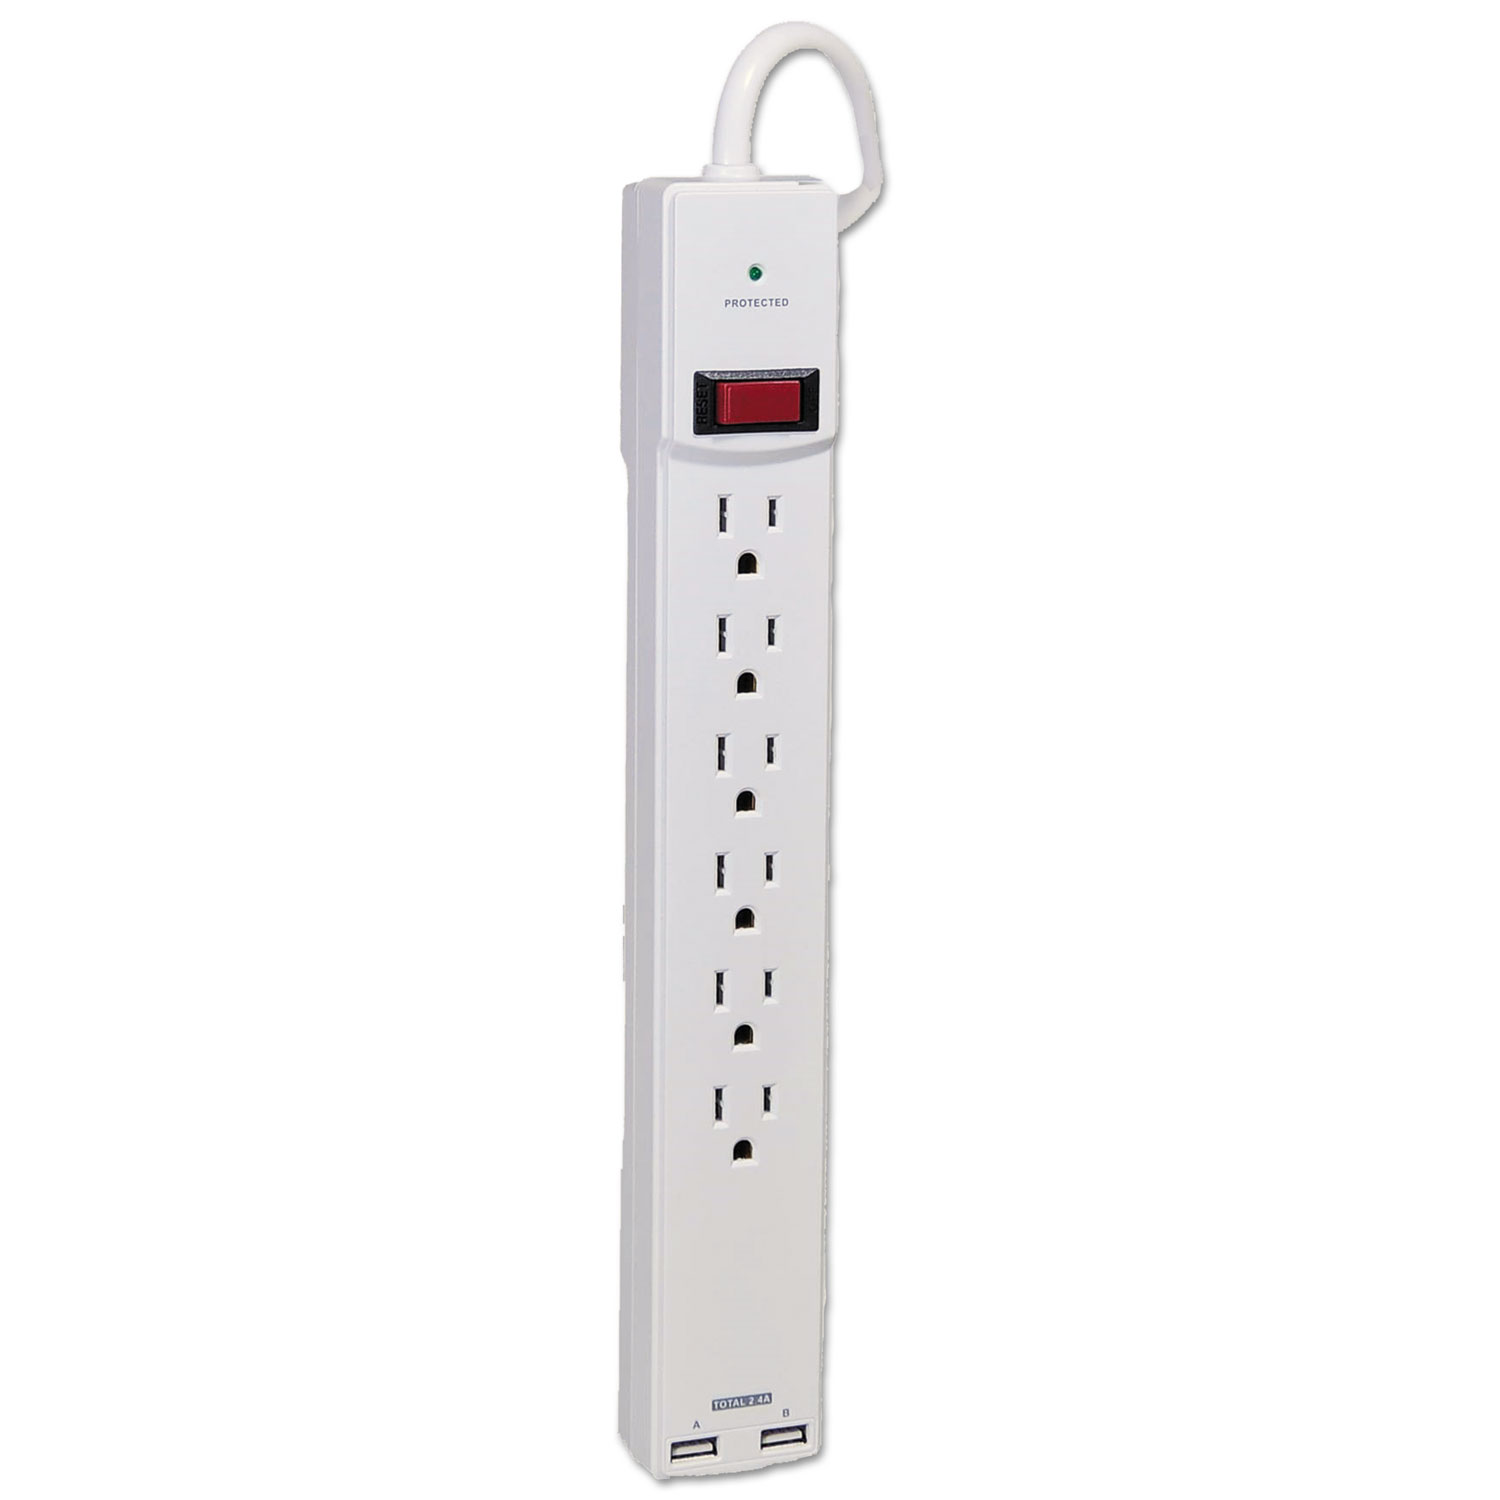  Innovera IVR71660 Surge Protector, 6 Outlets/2 USB Charging Ports, 6 ft Cord, 1080 Joules, White (IVR71660) 